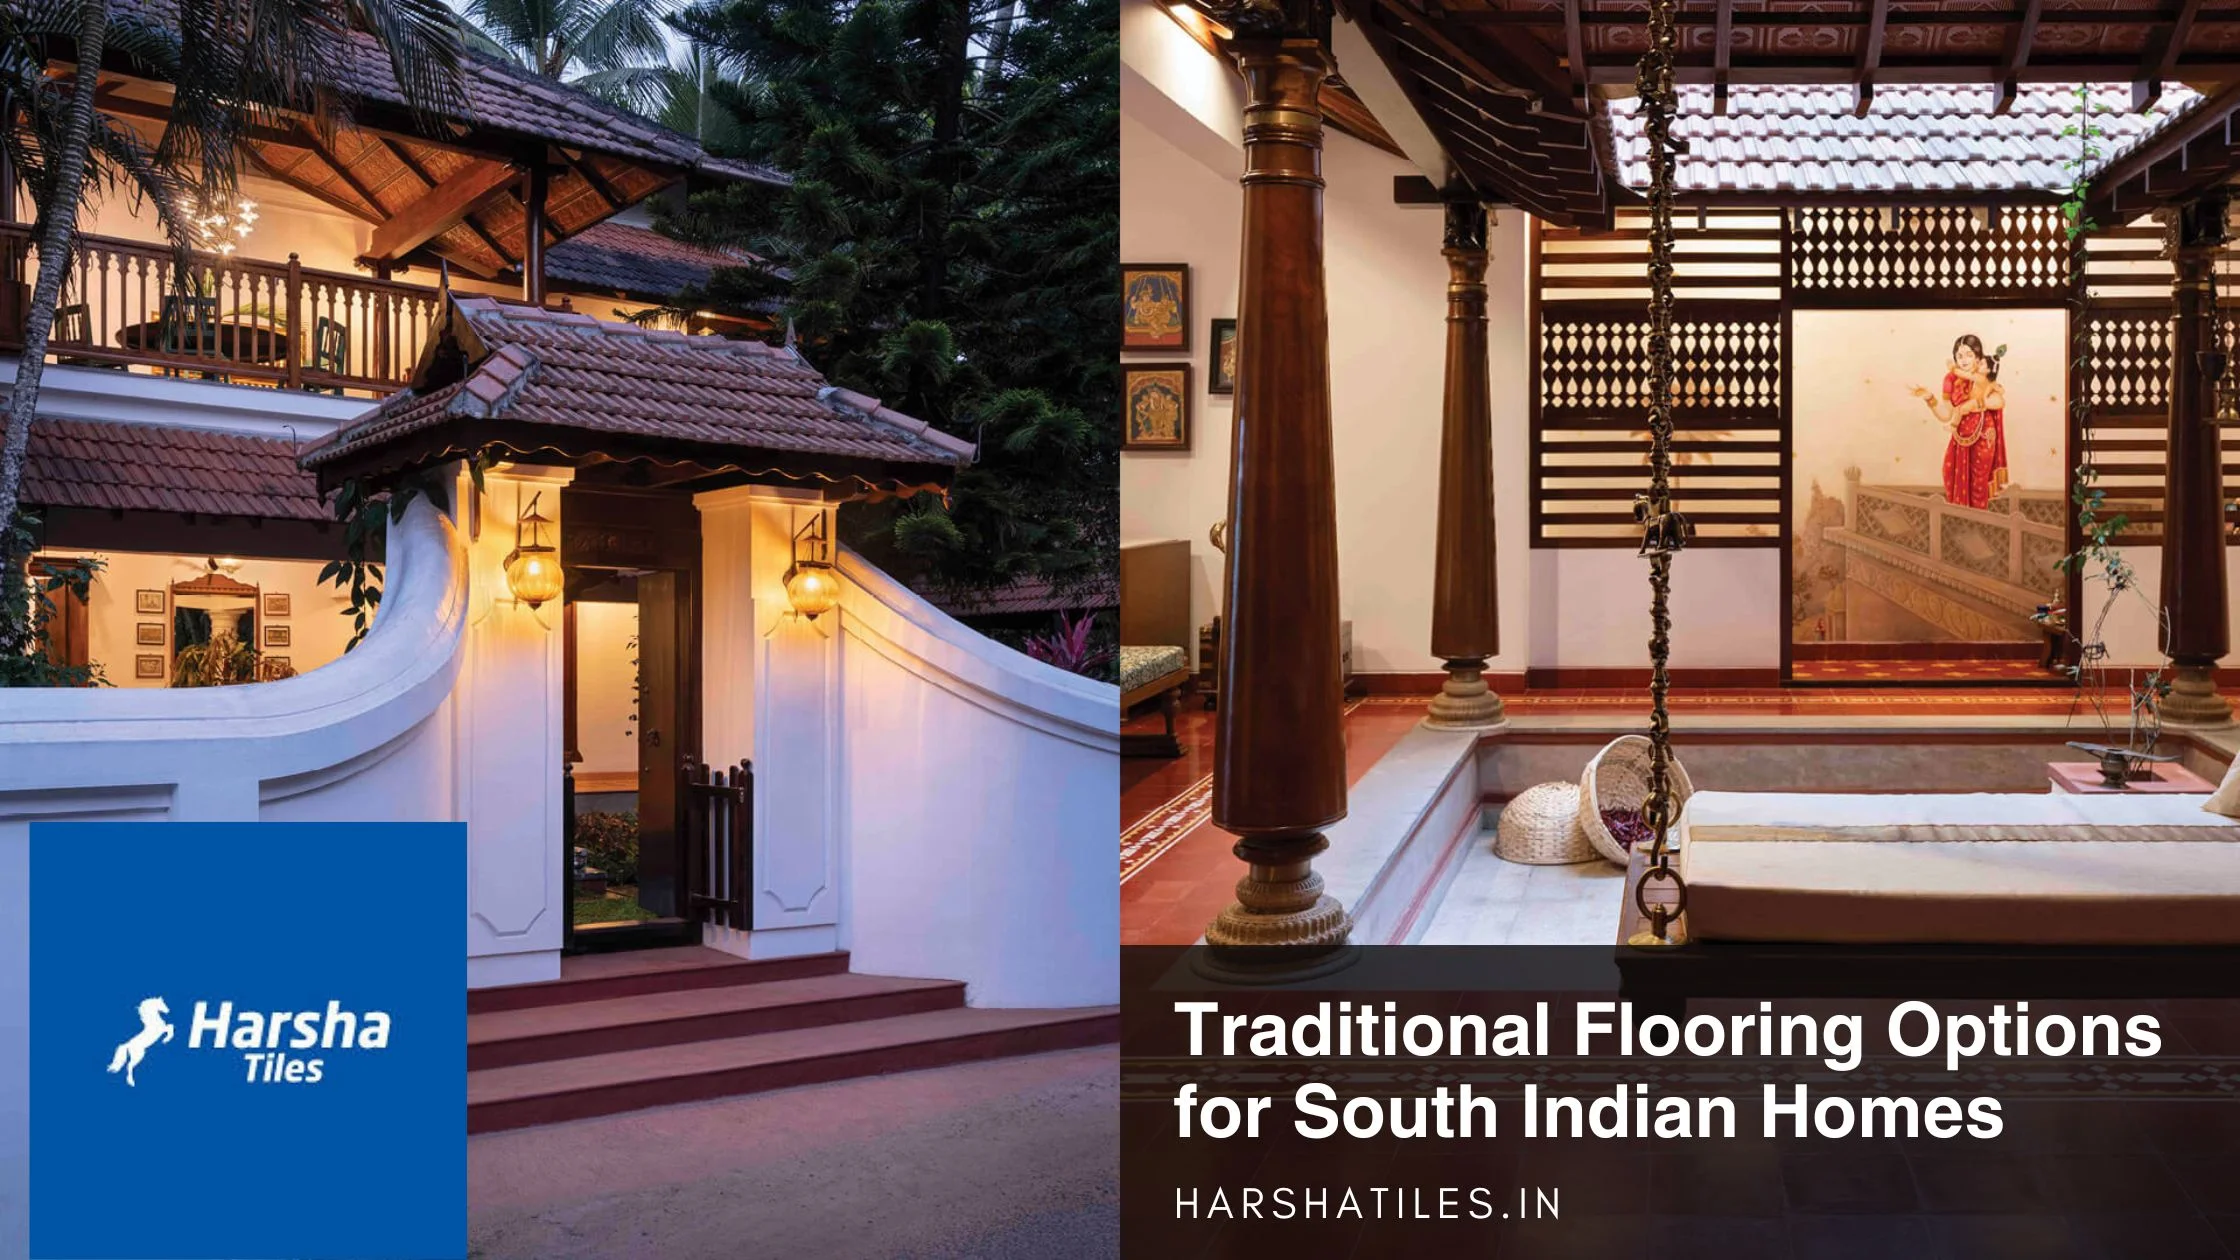 Traditional Flooring Options for South Indian Homes